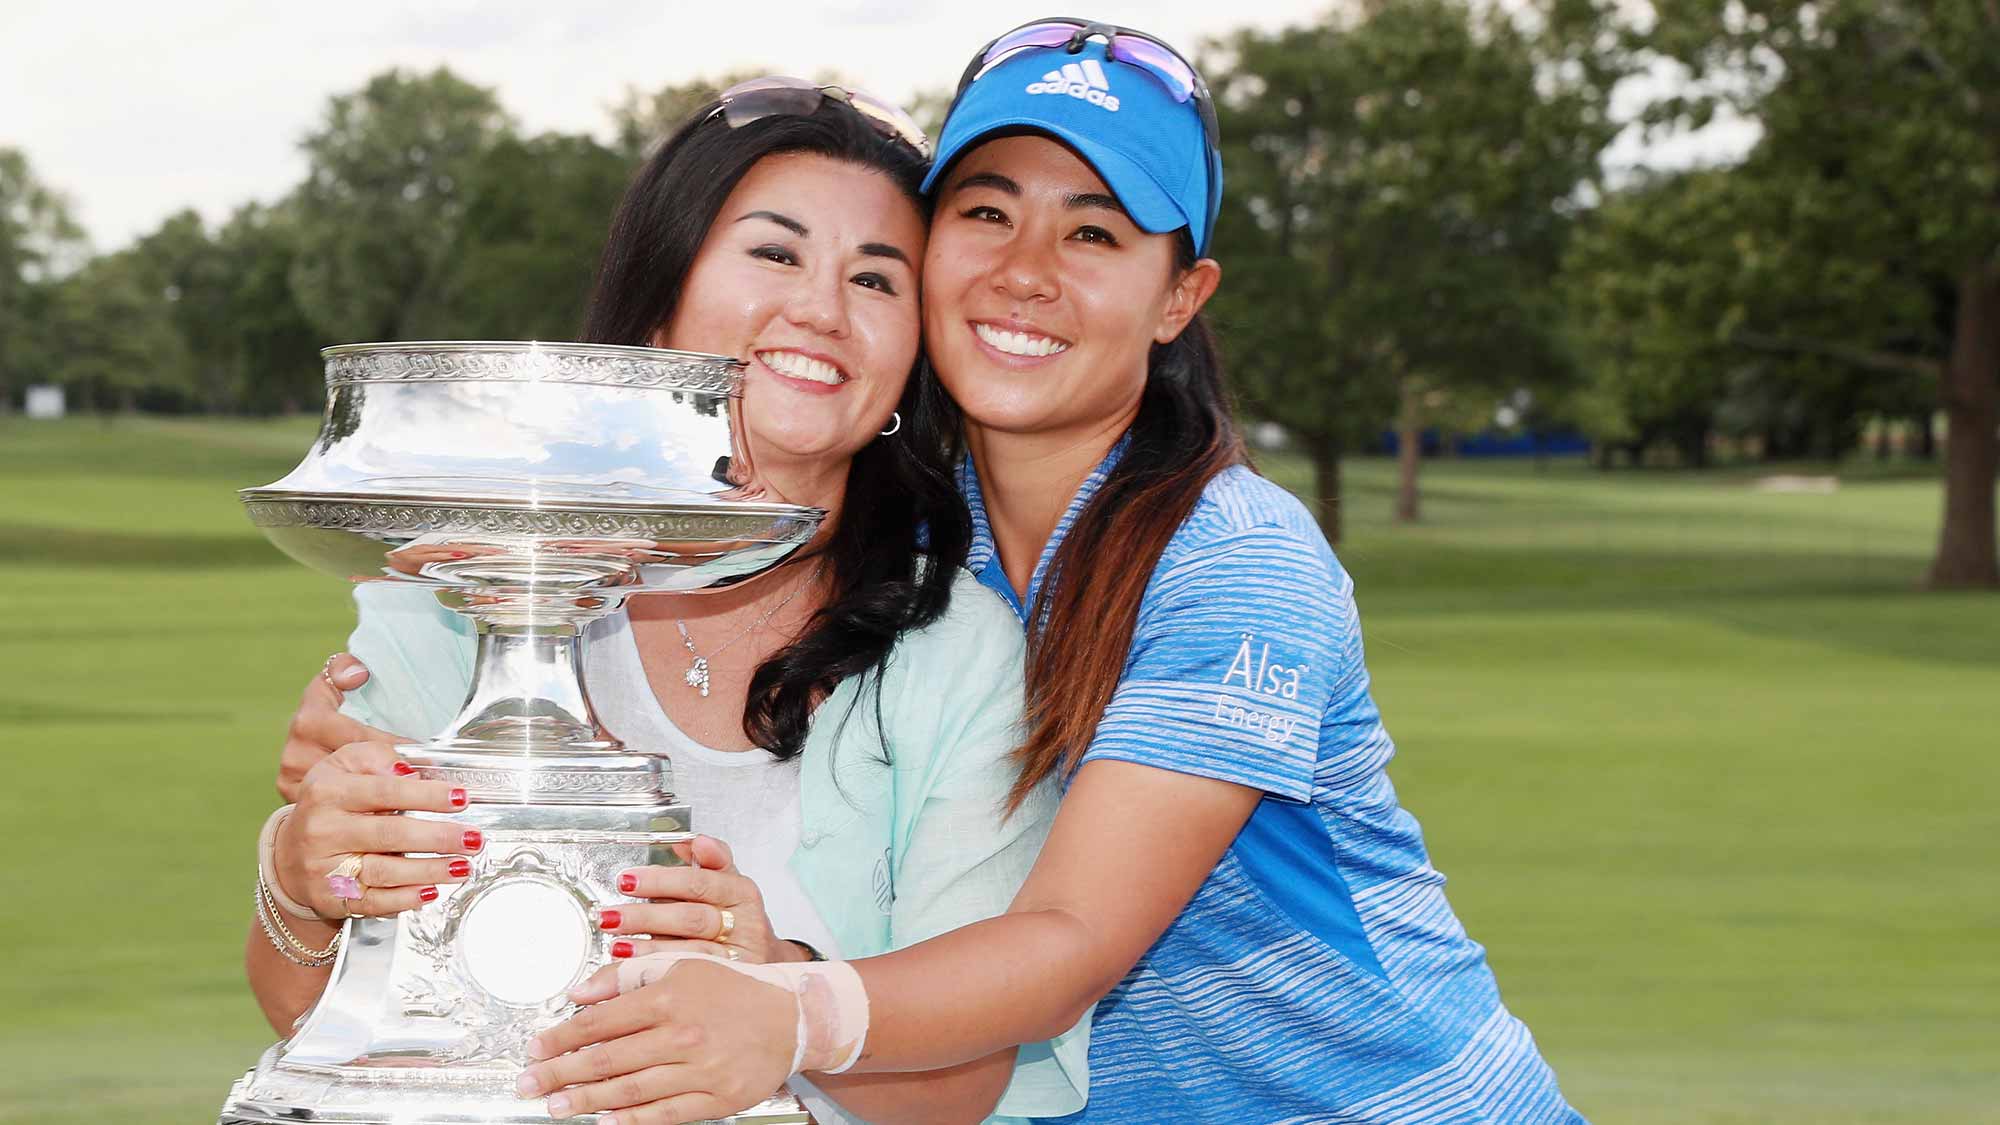 All in The Family | LPGA | Ladies Professional Golf Association